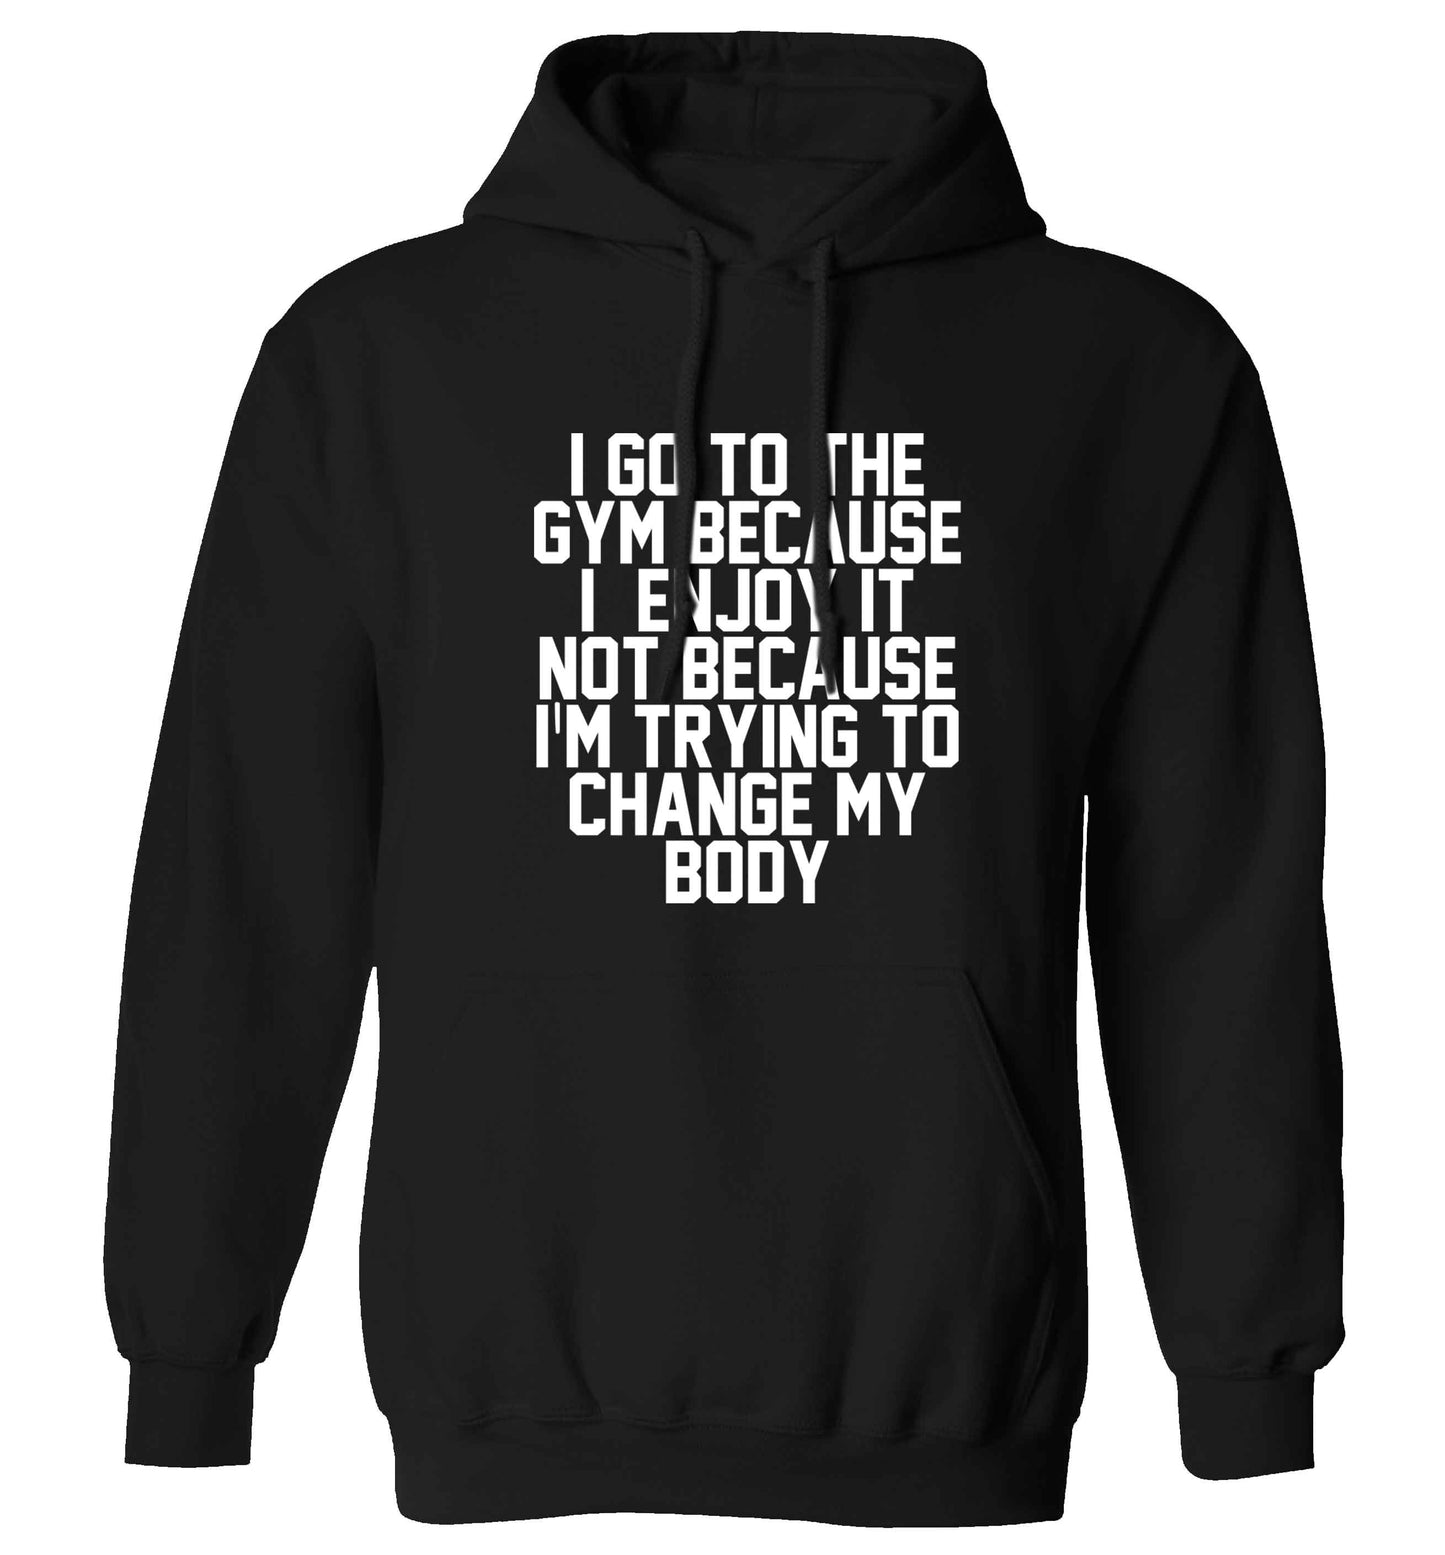 I go to the gym because I enjoy it not because I'm trying to change my body adults unisex black hoodie 2XL